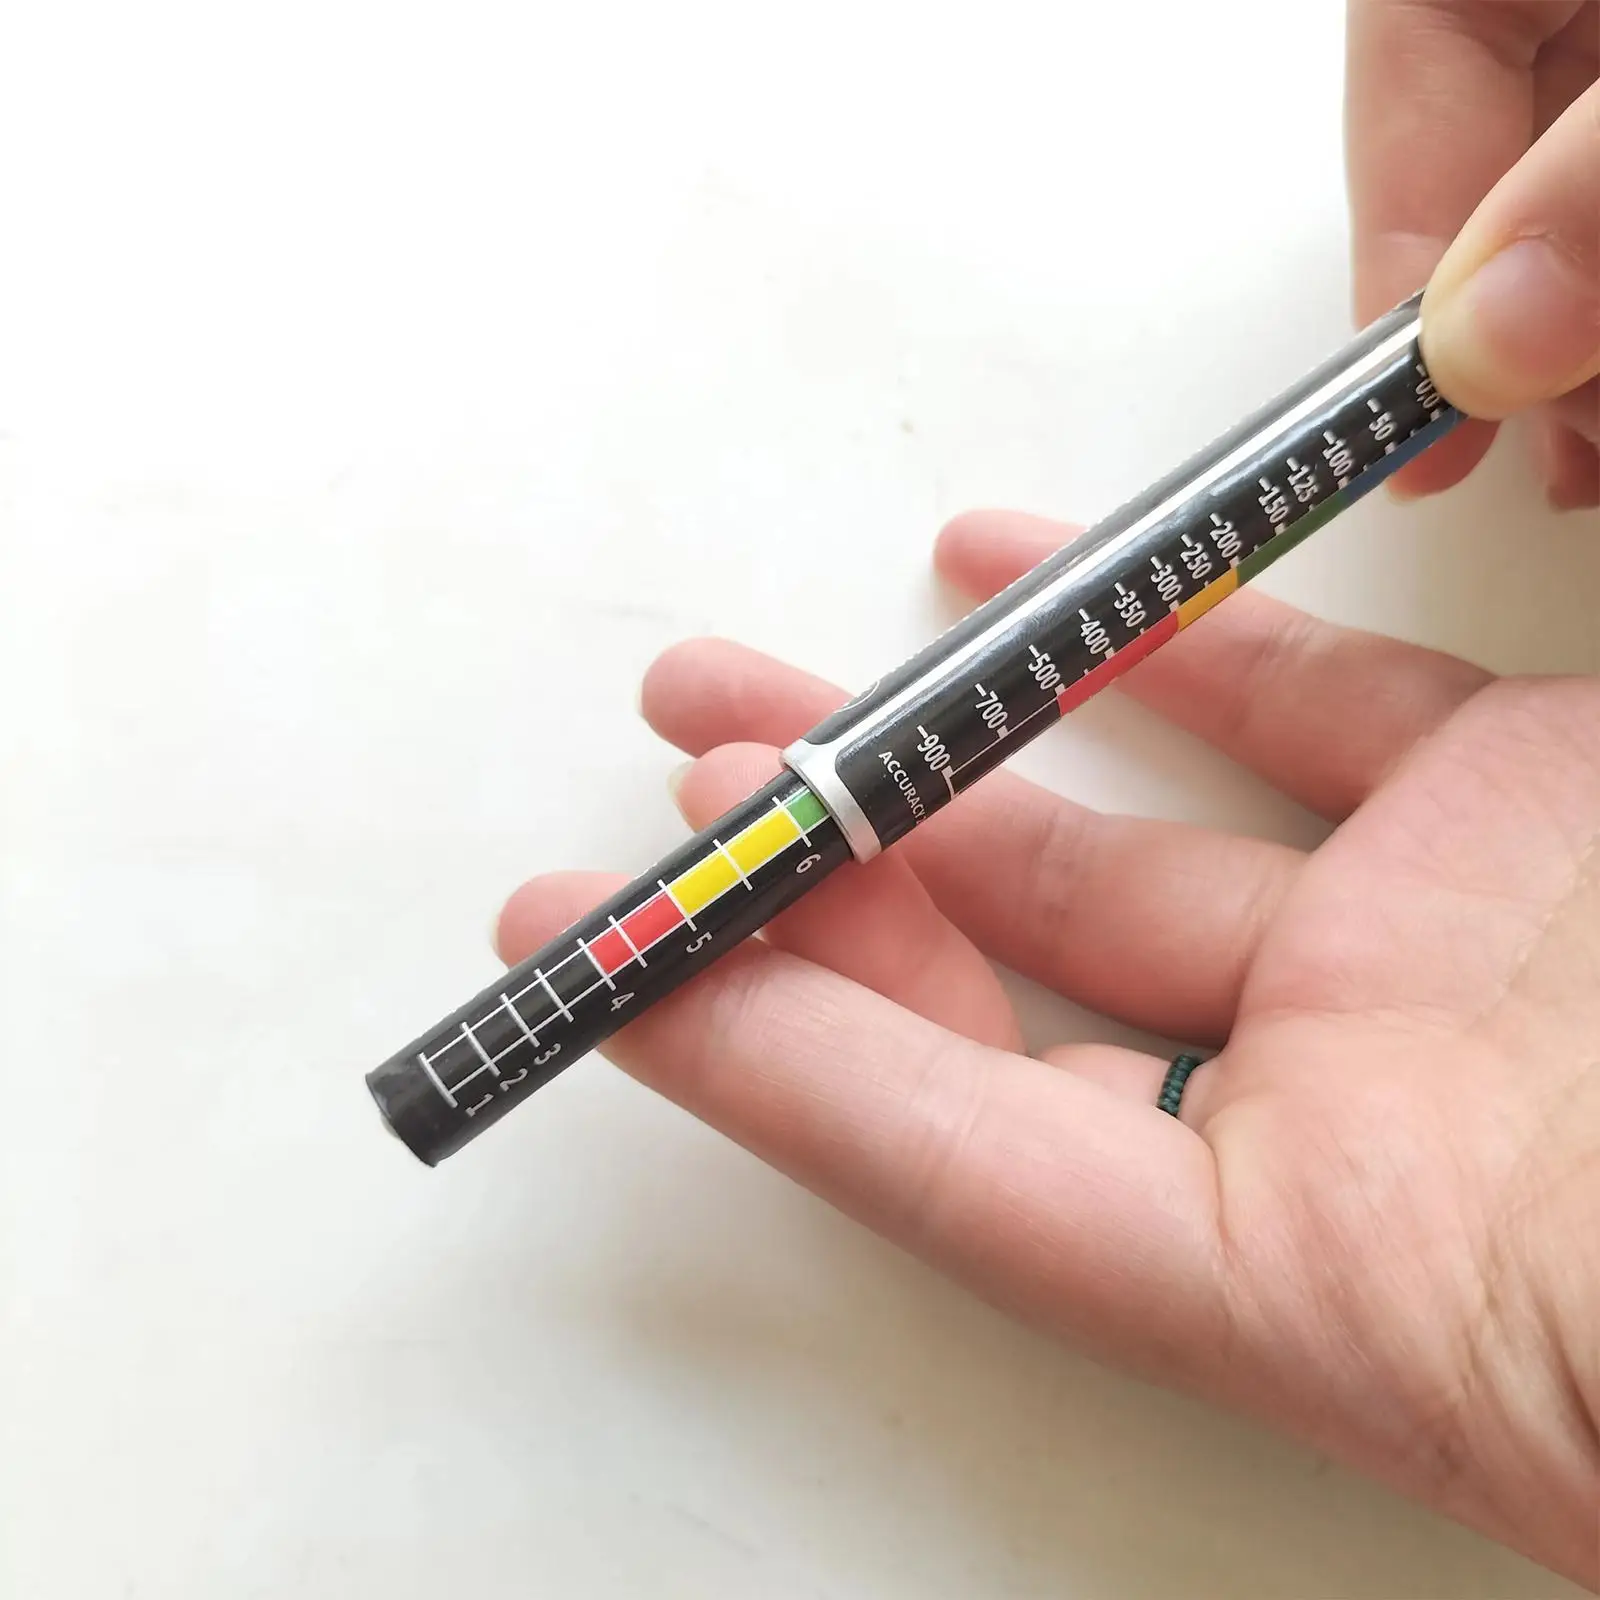 Pen Shaped Paint Thickness Gauge Waterproof for Gauge Thickness of Car Paint